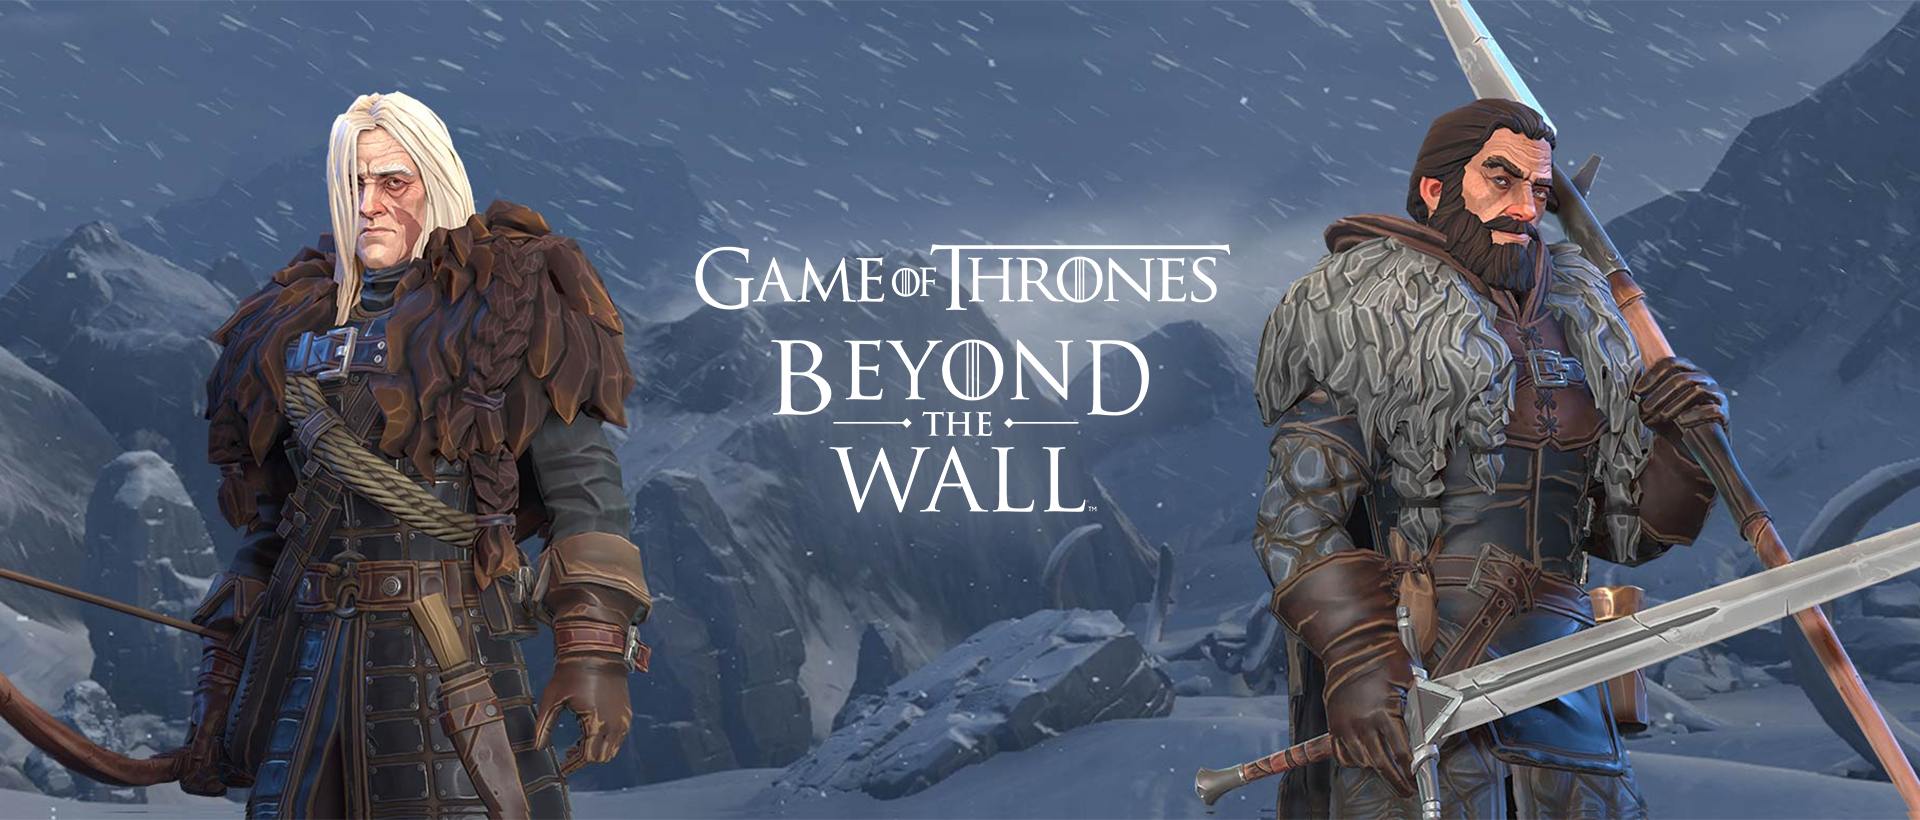 game of thrones beyond the wall springfield